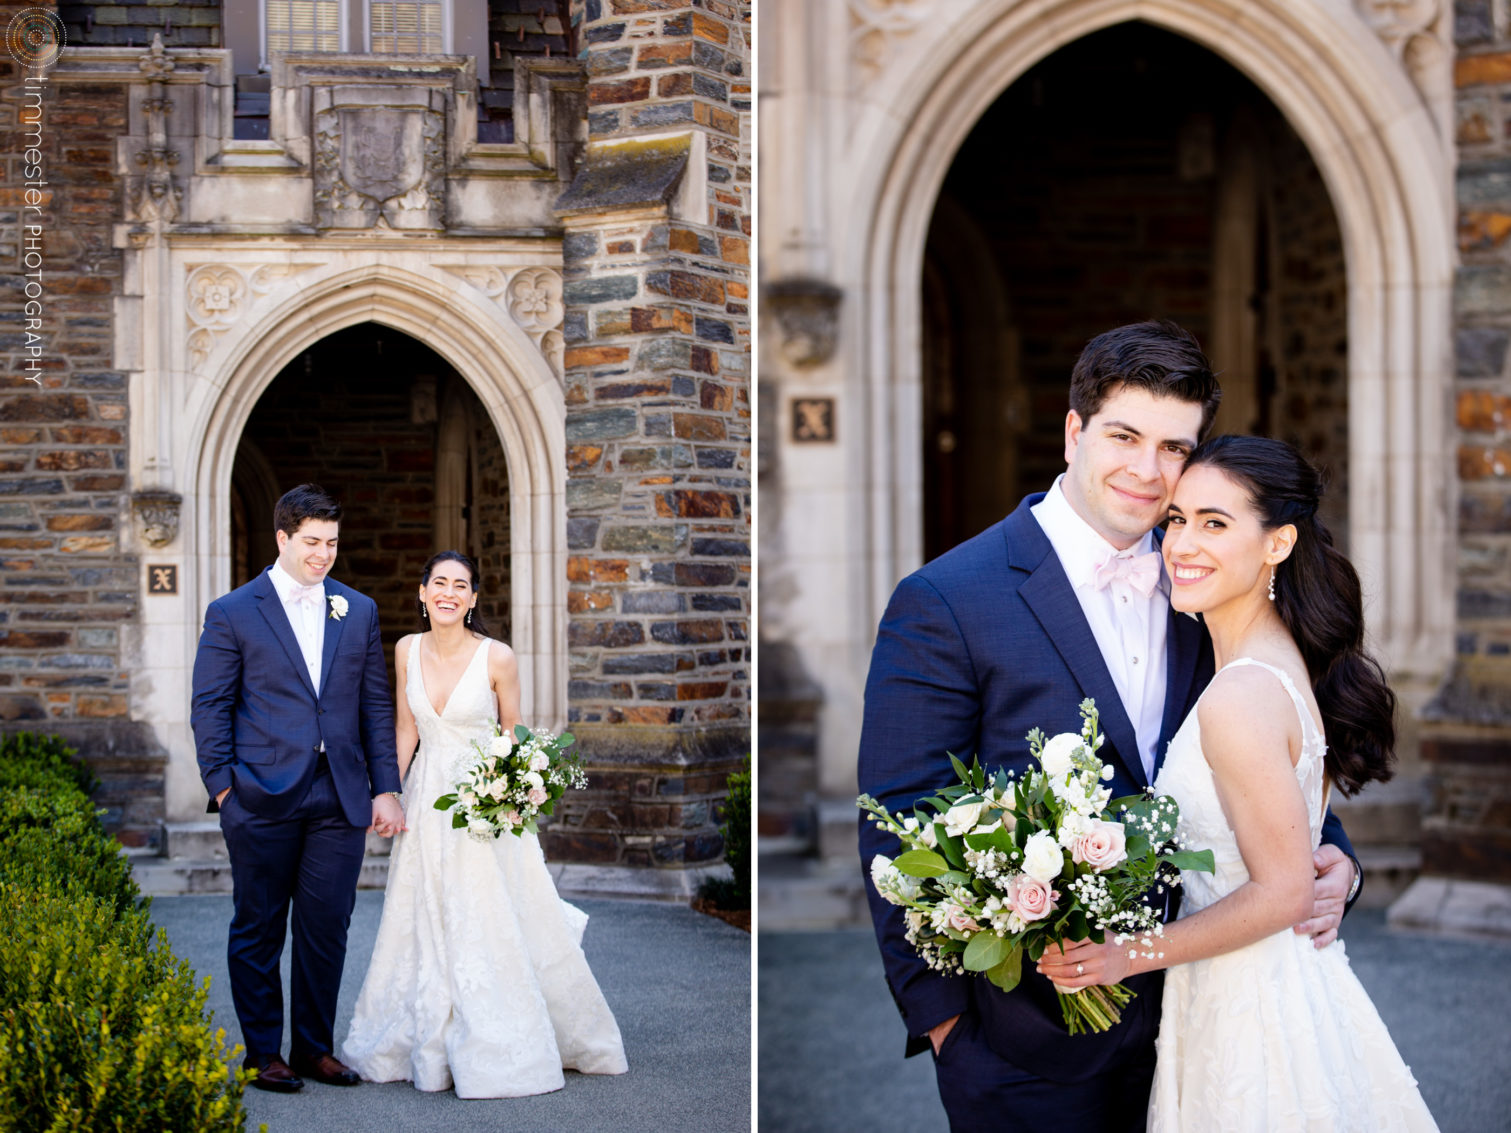 Duke University portraits of bride and groom on their wedding day 